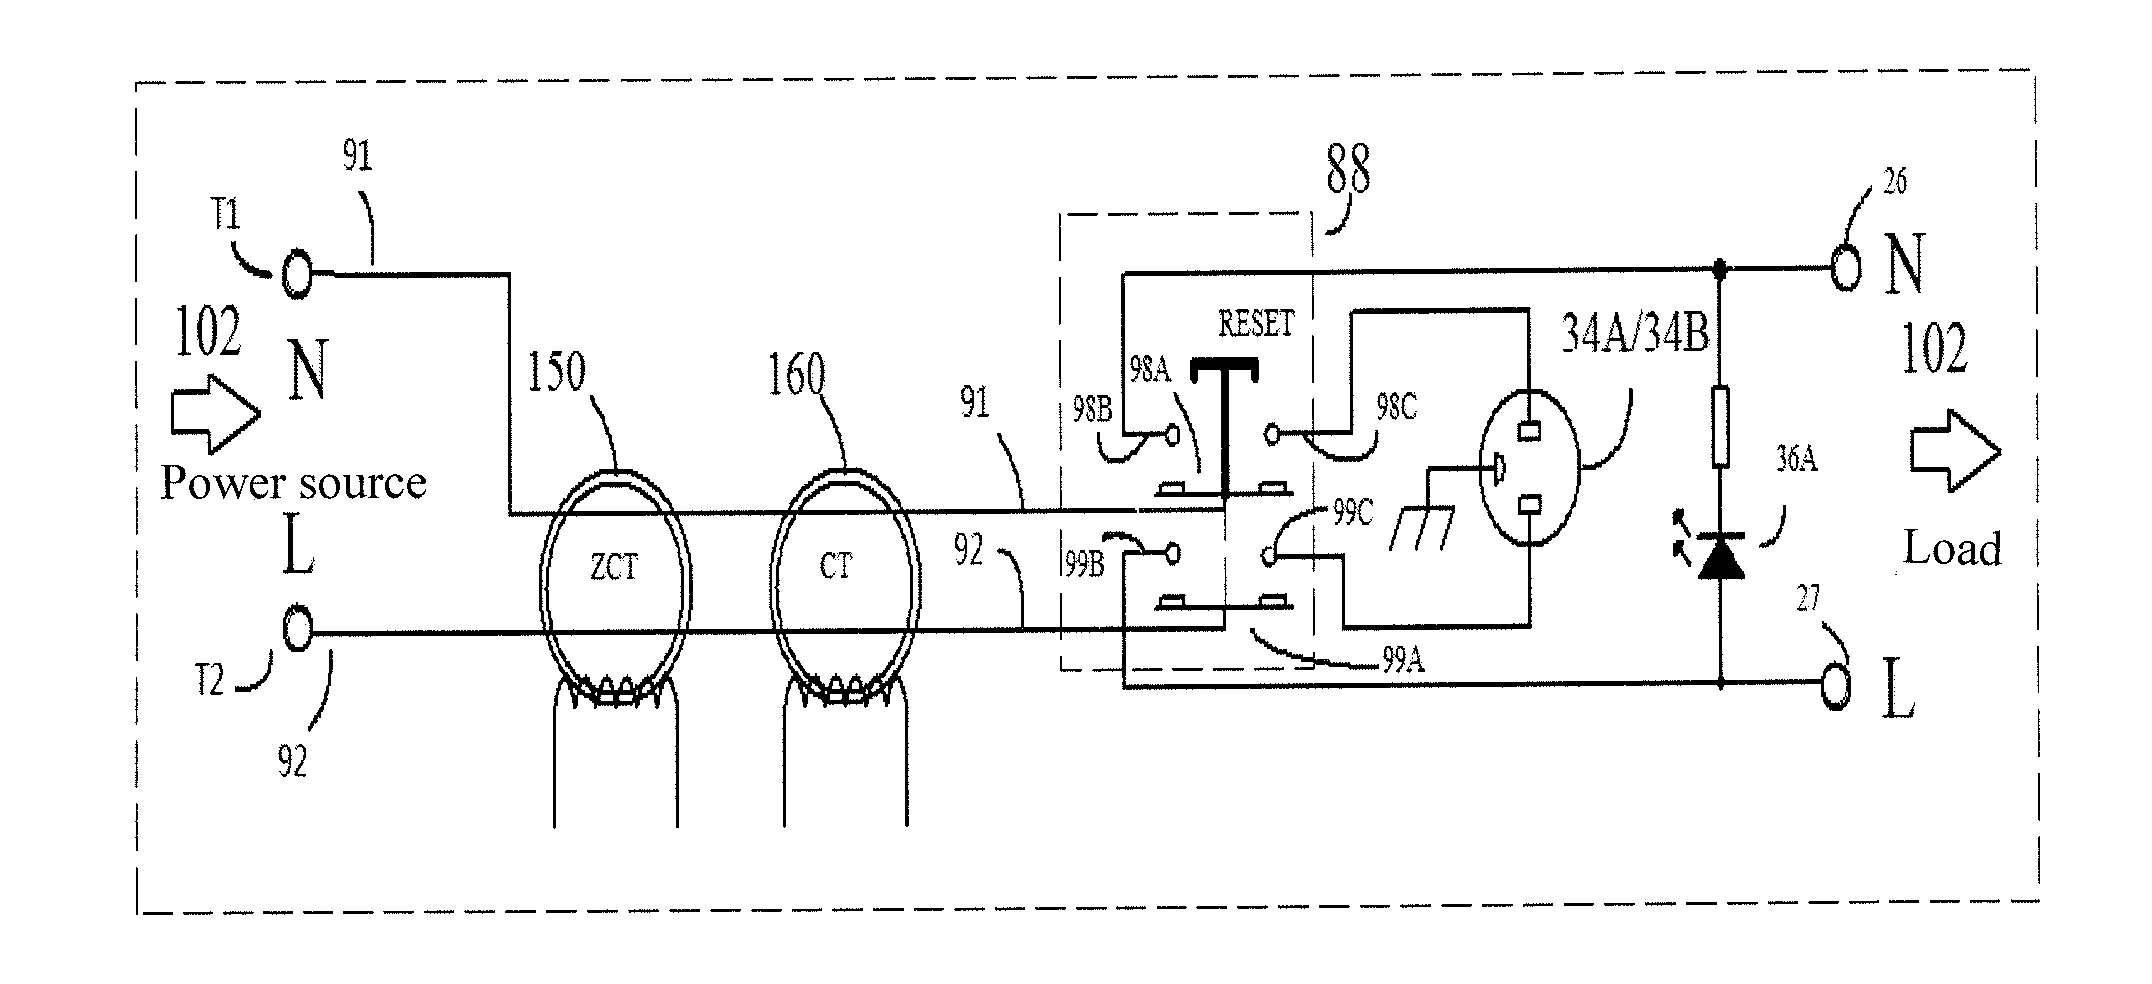 Circuit protection device with automatic fault monitoring and detection function